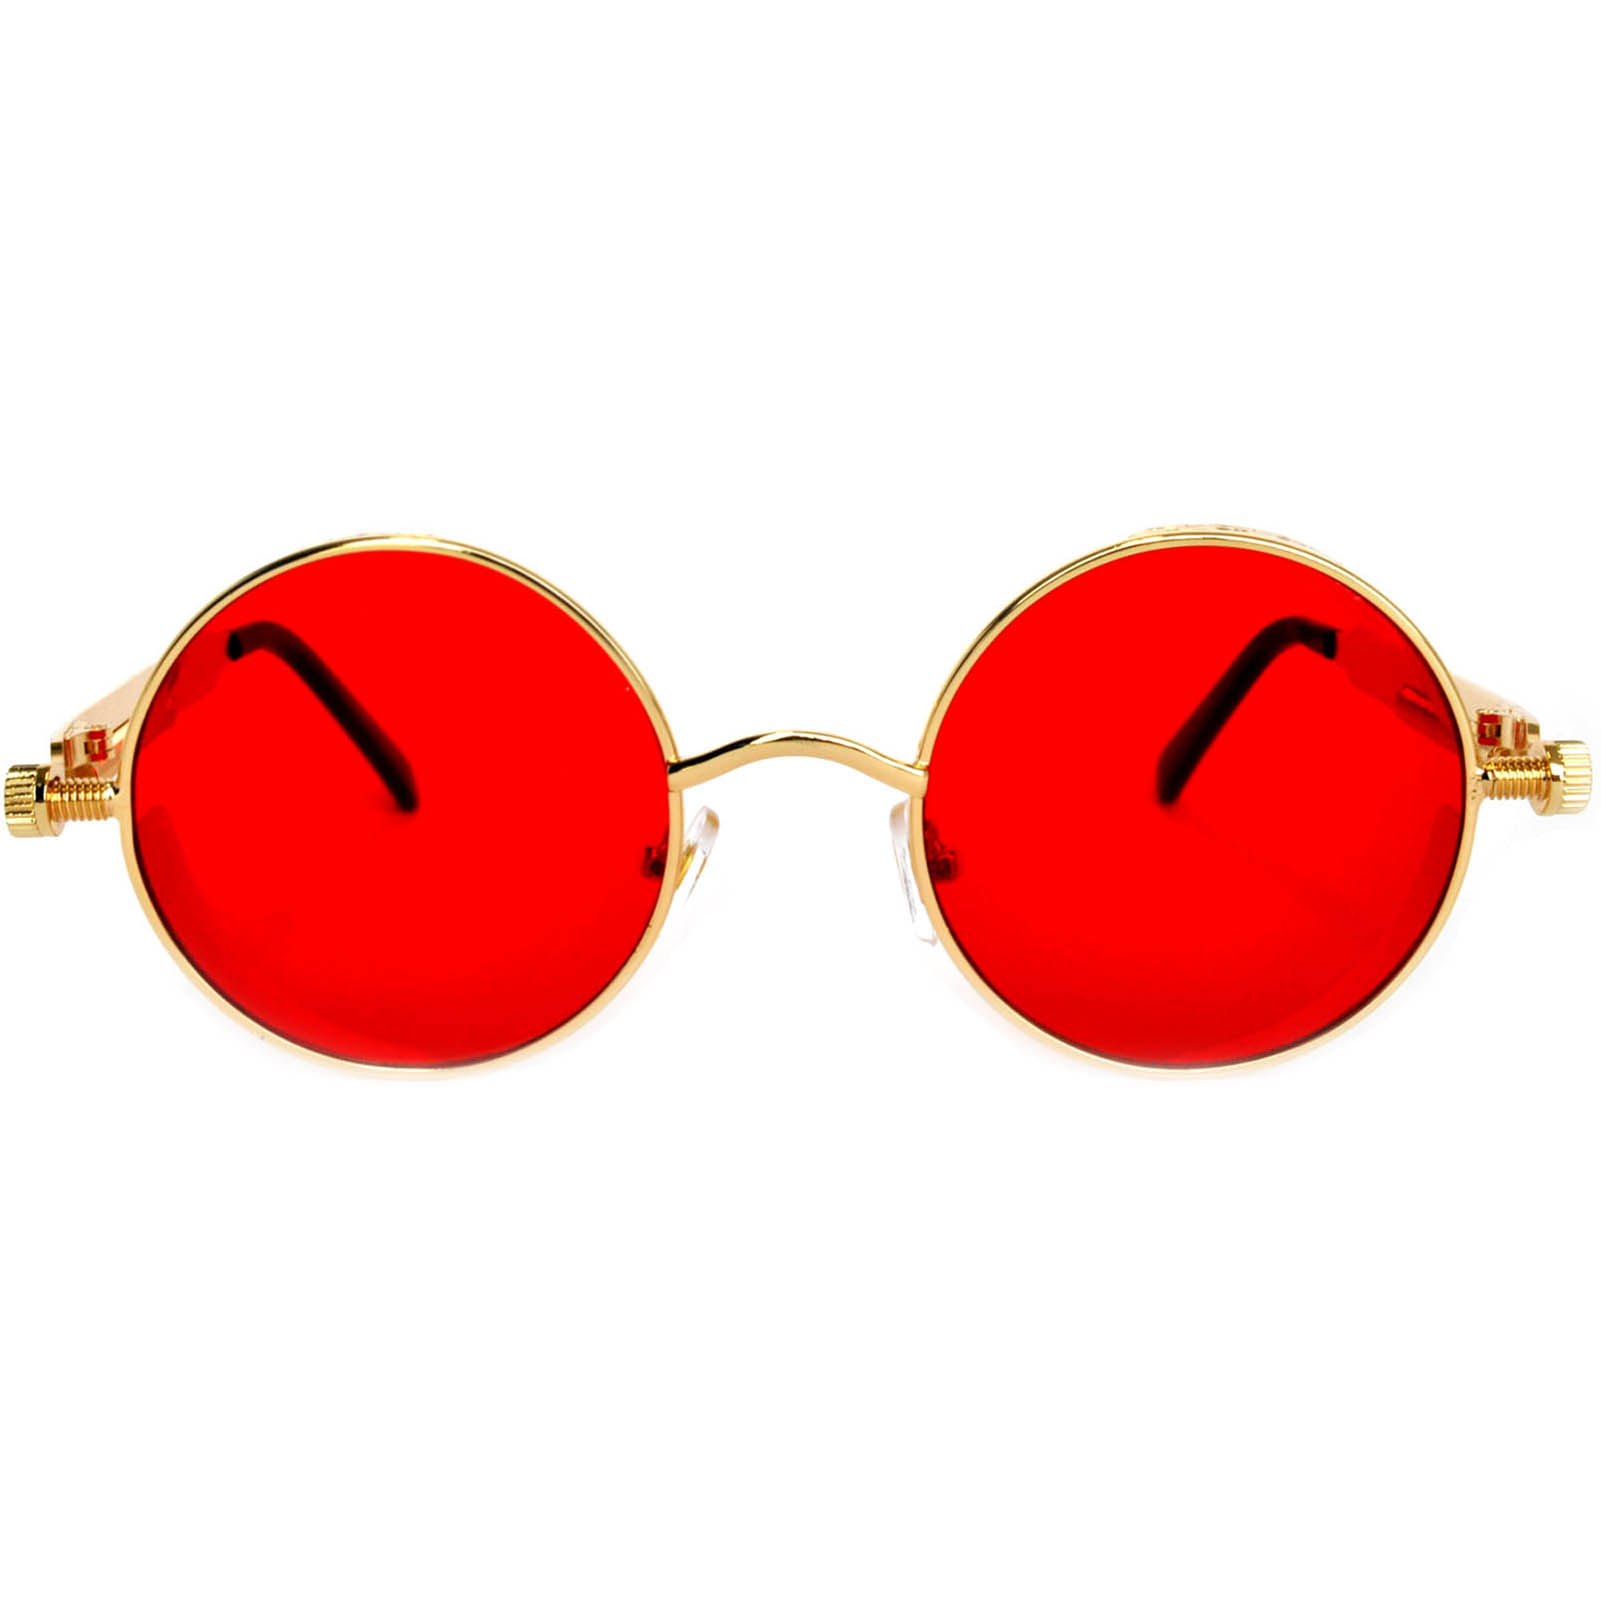 060 C10 Steampunk Gothic Sunglasses Metal Round Circle Gold Frame Red ...